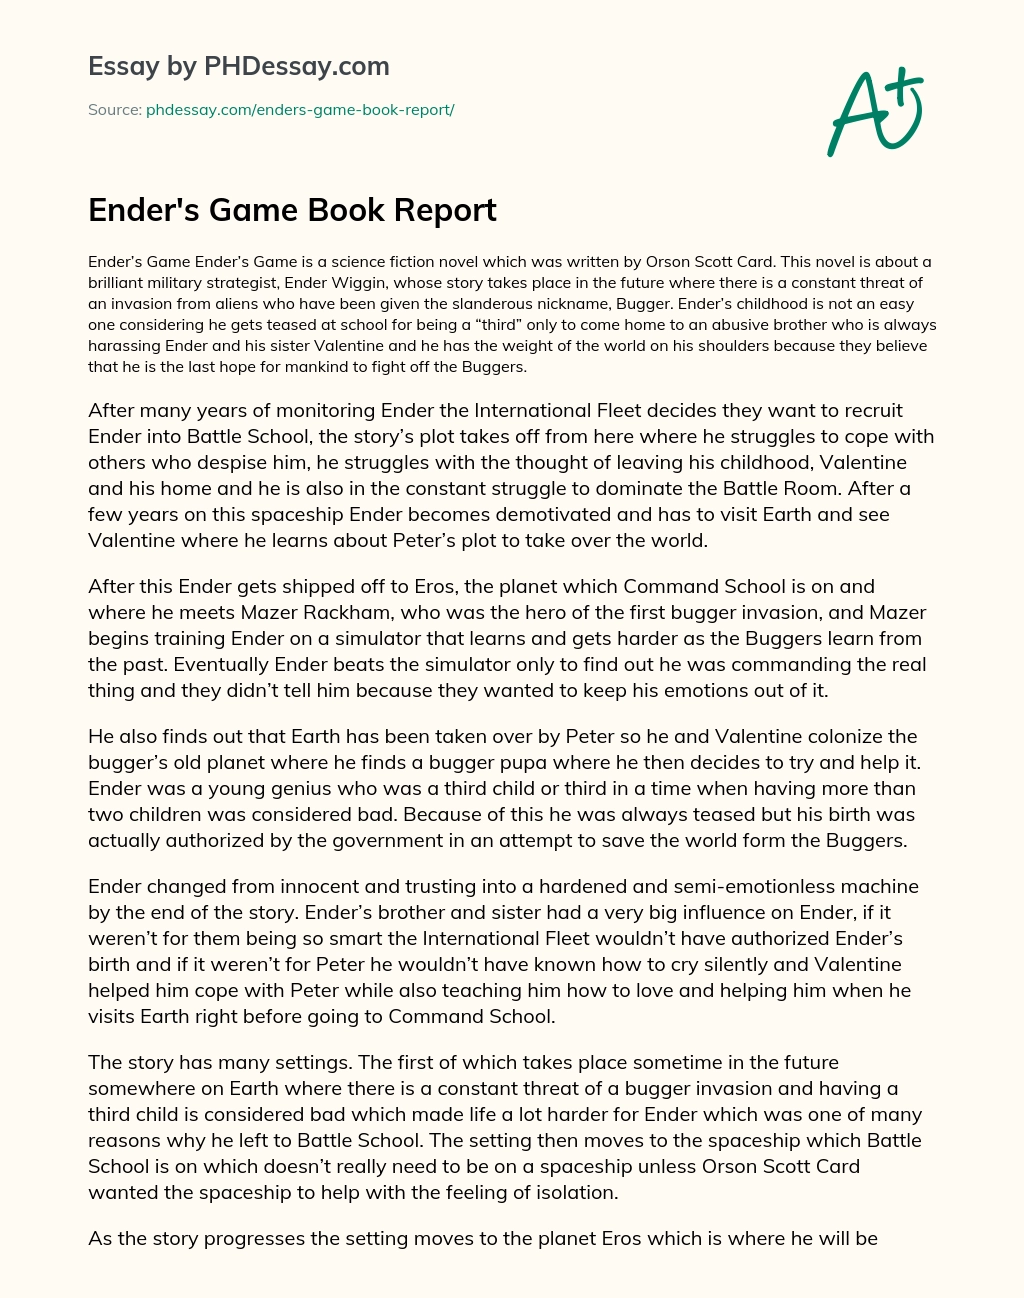 Ender’s Game Book Report essay